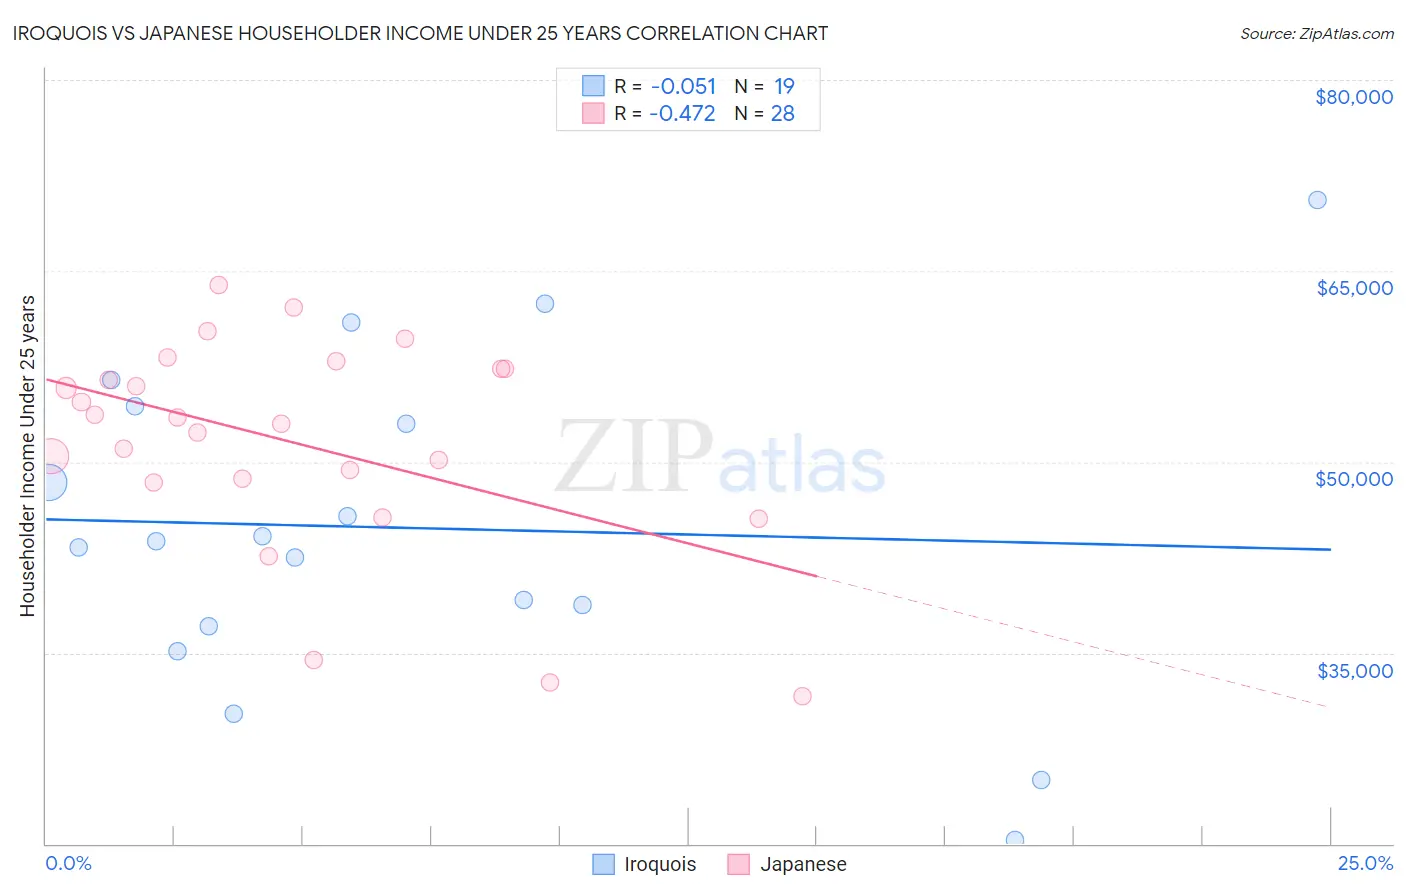 Iroquois vs Japanese Householder Income Under 25 years